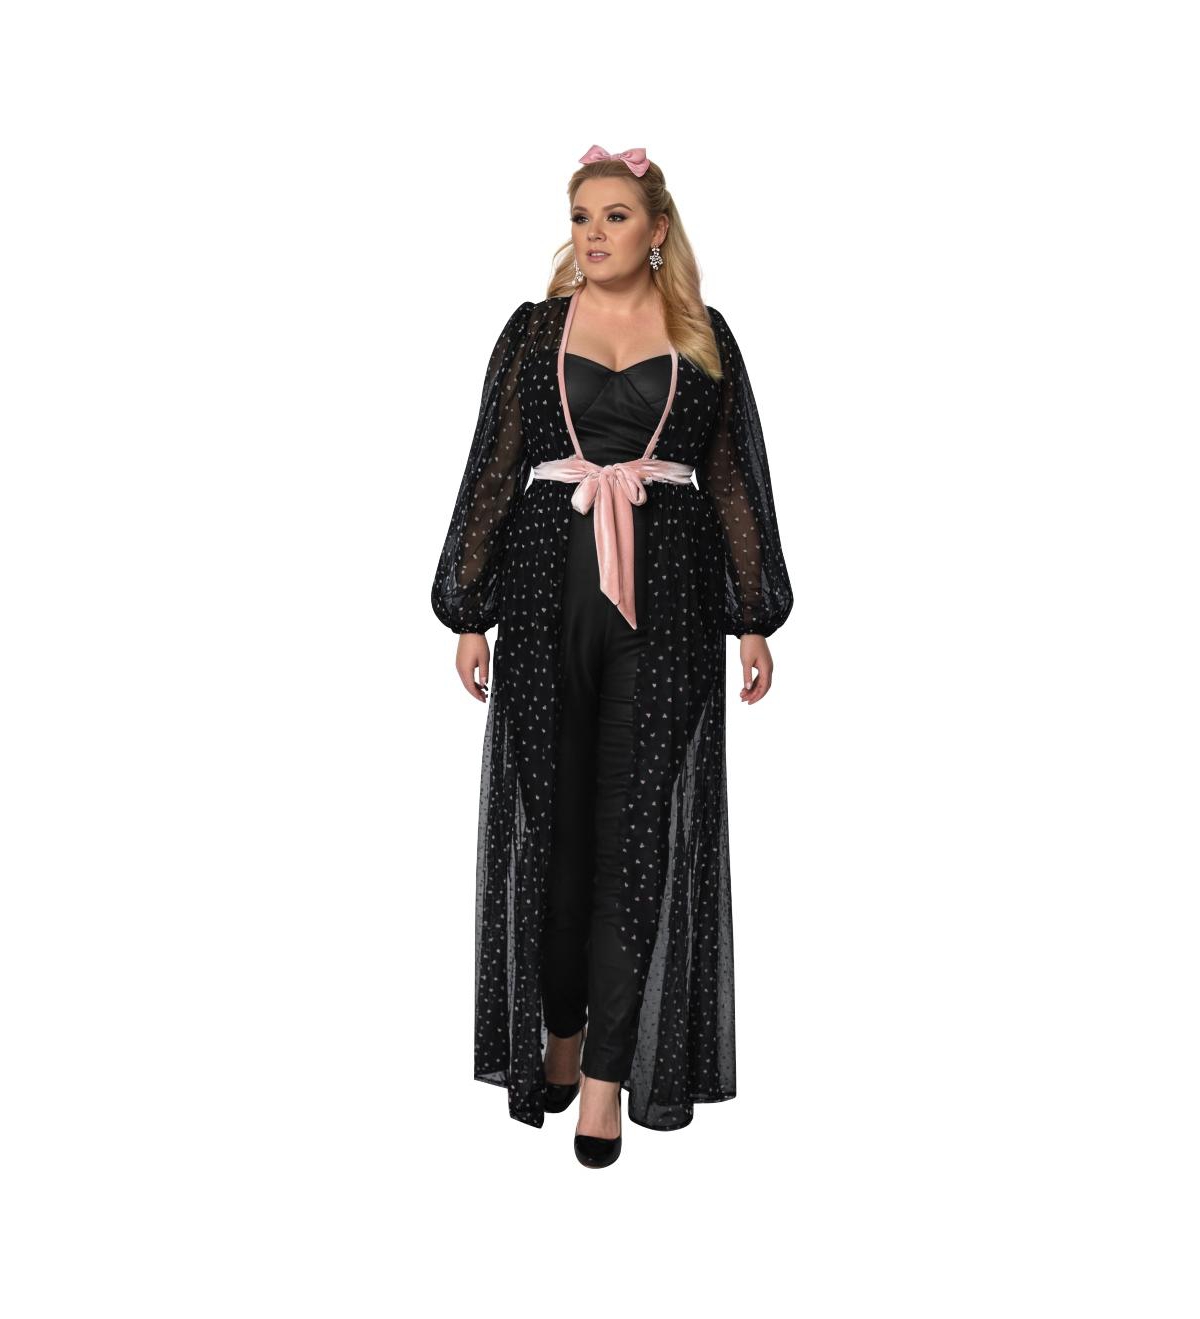 Plus Size Billow Long Sleeved Hollywood Duster - Black/pink hearts